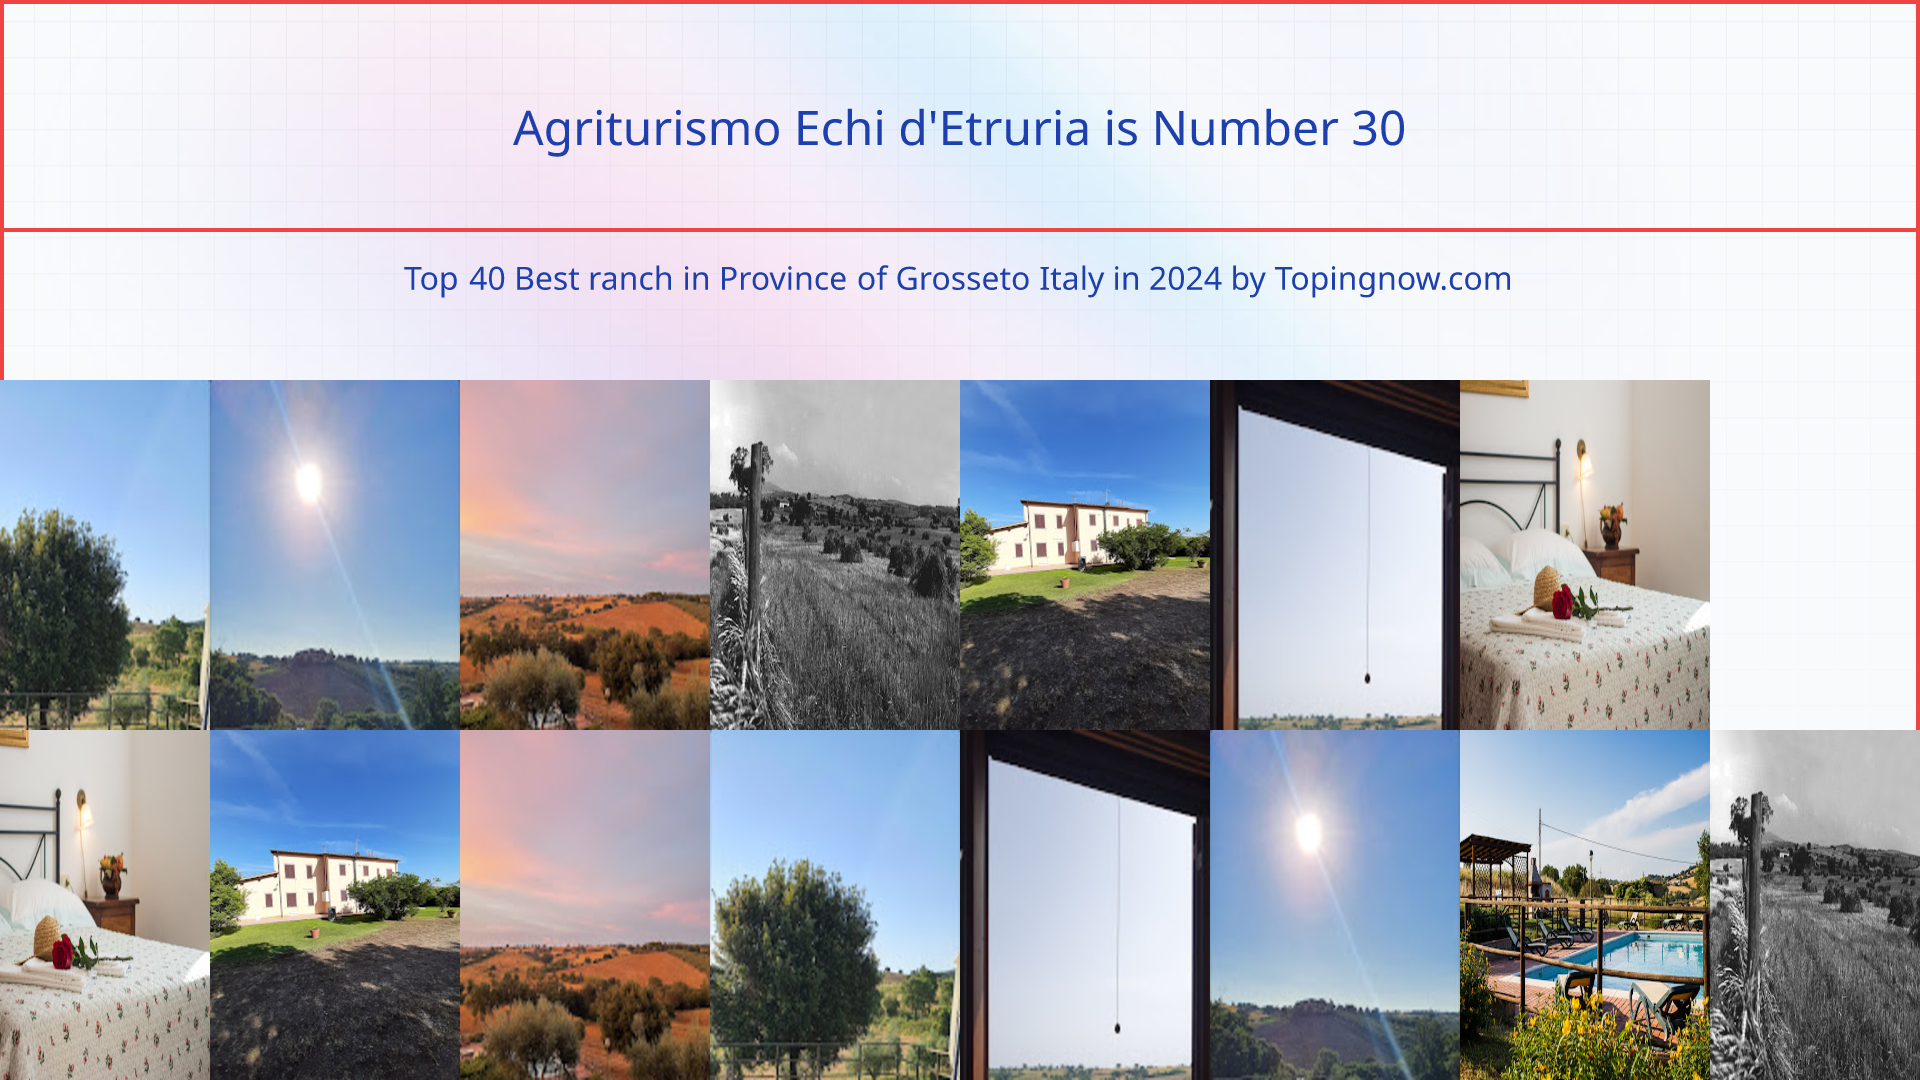 Agriturismo Echi d'Etruria: Top 40 Best ranch in Province of Grosseto Italy in 2024